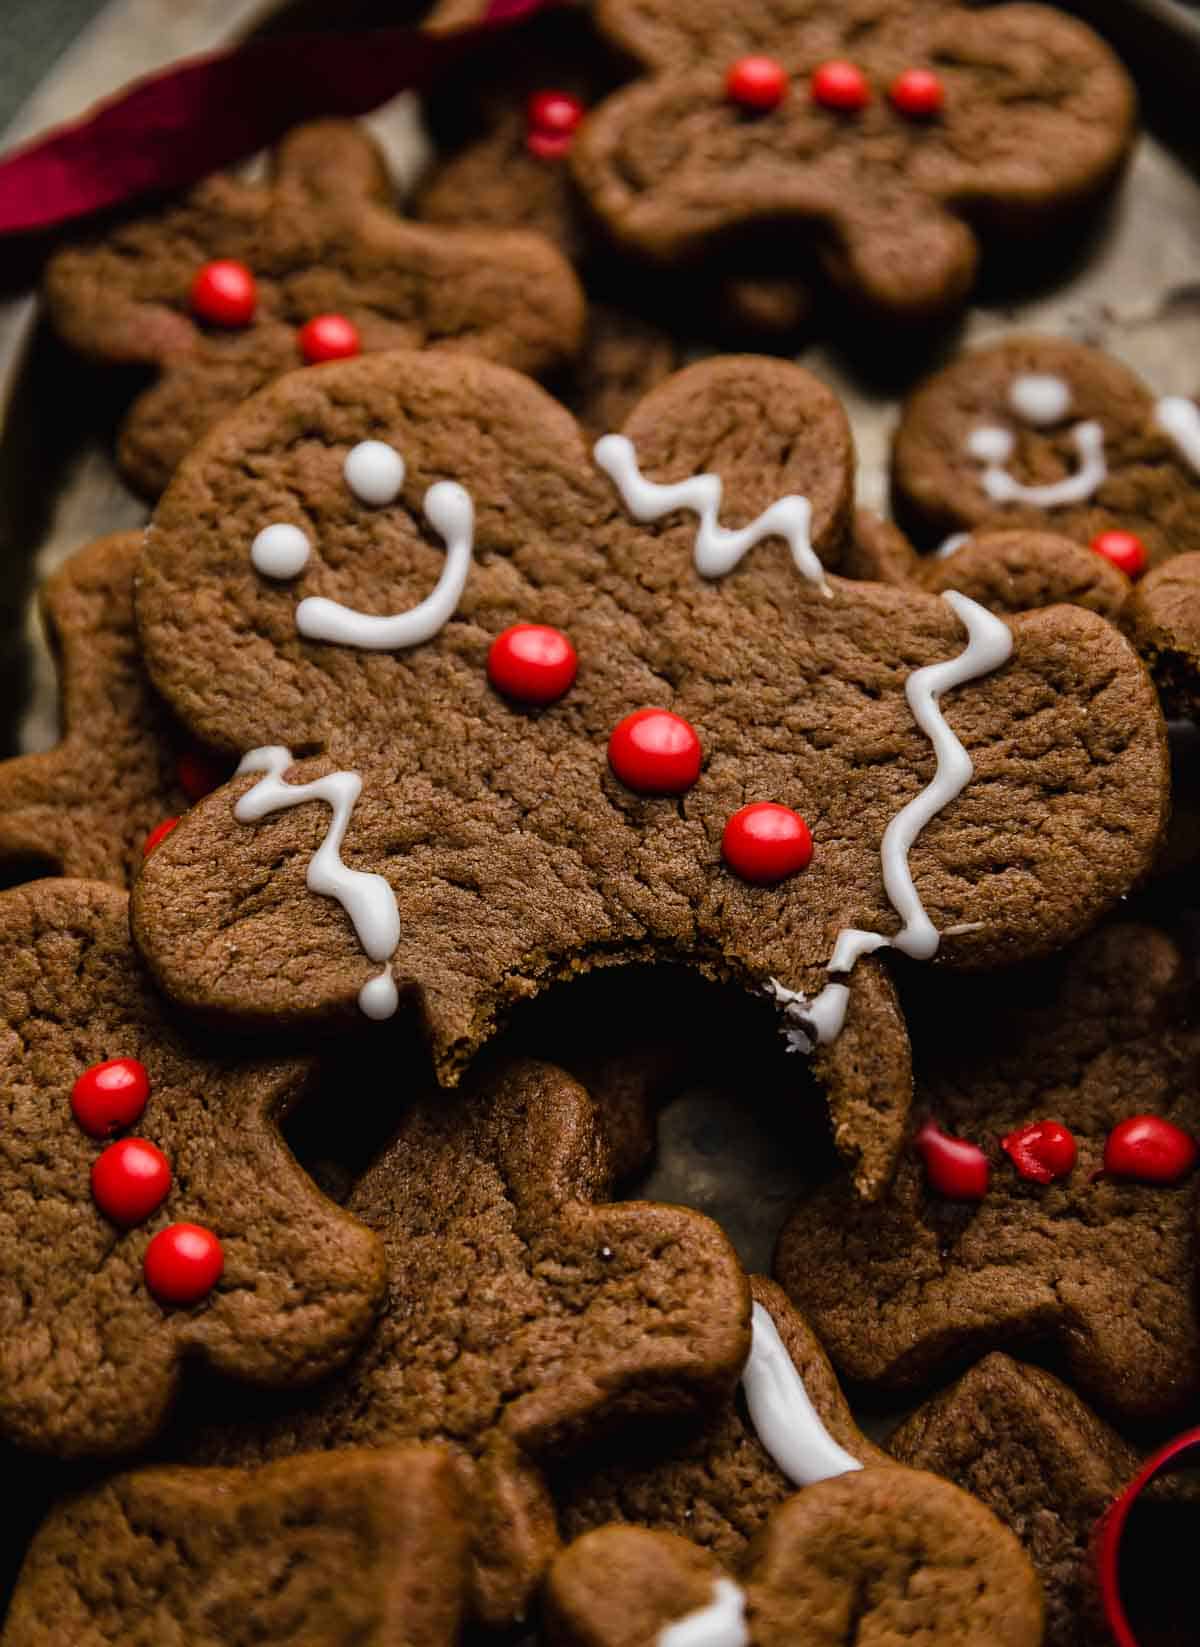 A gingerbread man cookie decorated with white frosting and red frosting buttons.